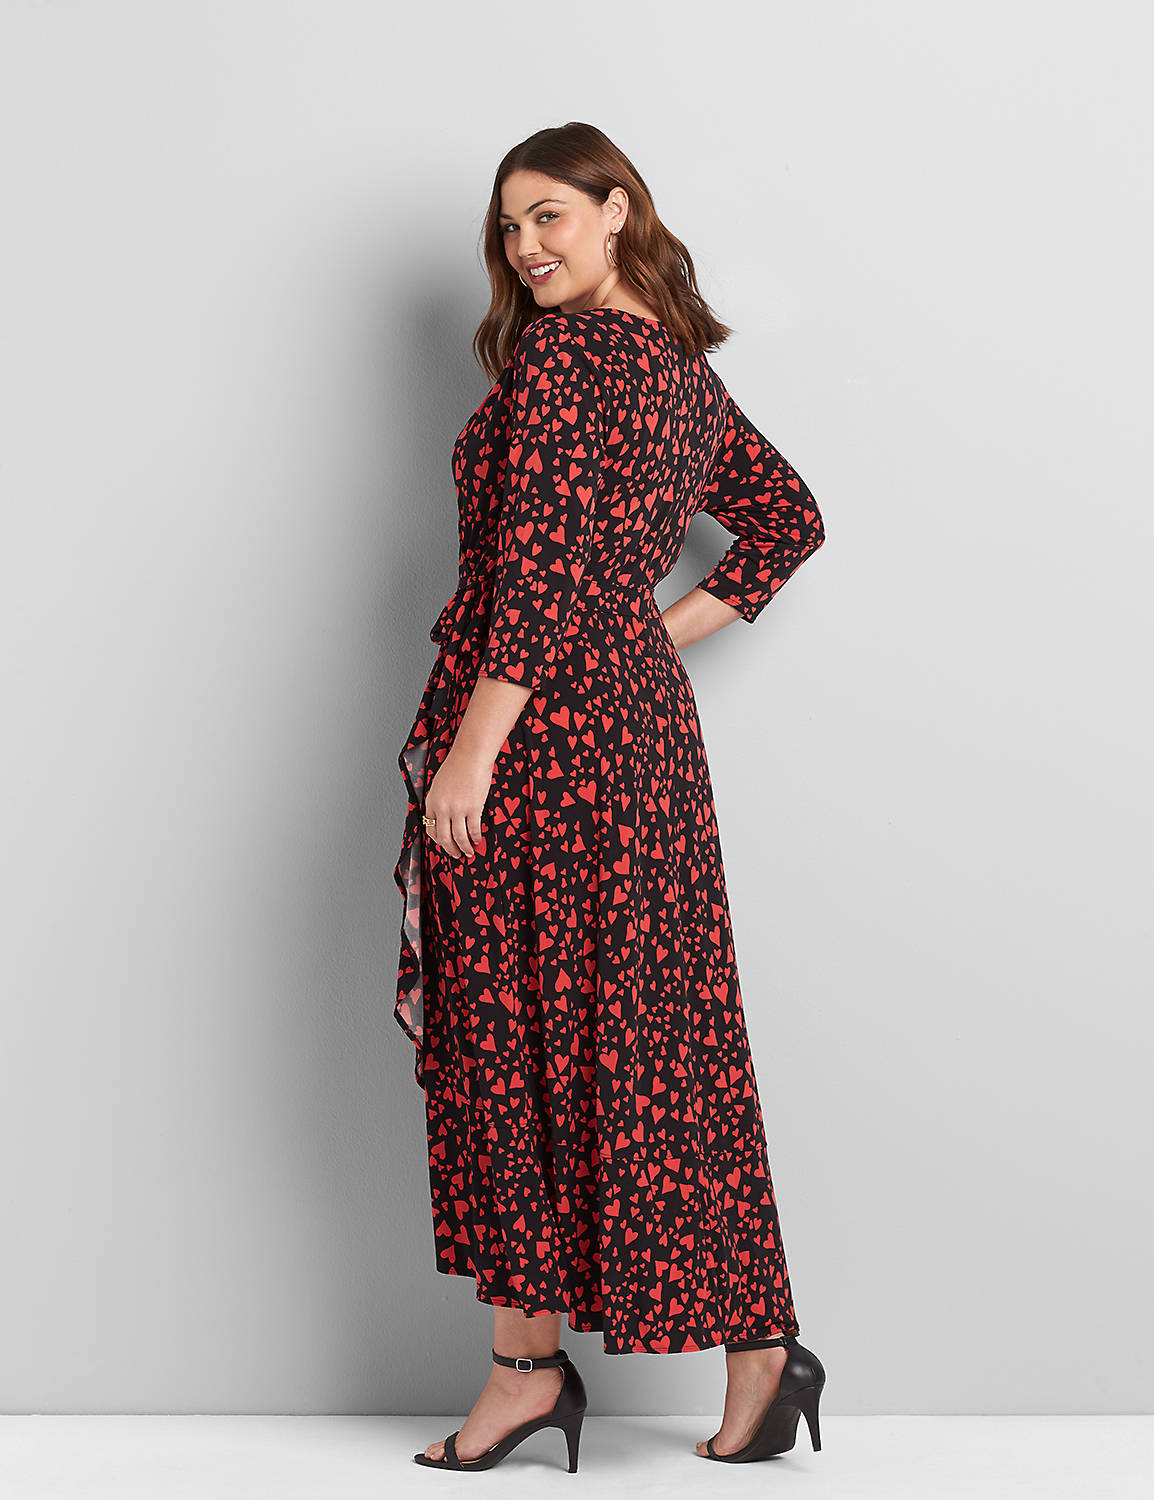 3/4 Sleeve Surplice Midi Wrap Matte Jersey Dress 1118165:LBH20226_FloatingHearts_colorway1:10/12 Product Image 2